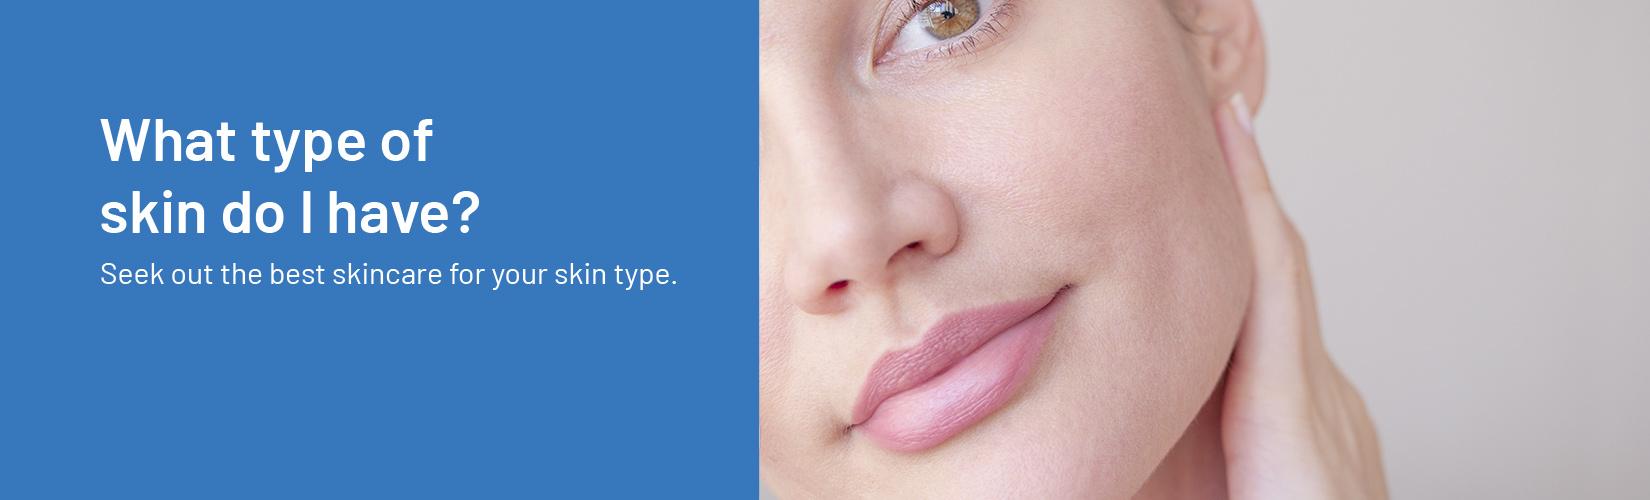 What type of skin do I have? Seek out the best skincare for your skin type.